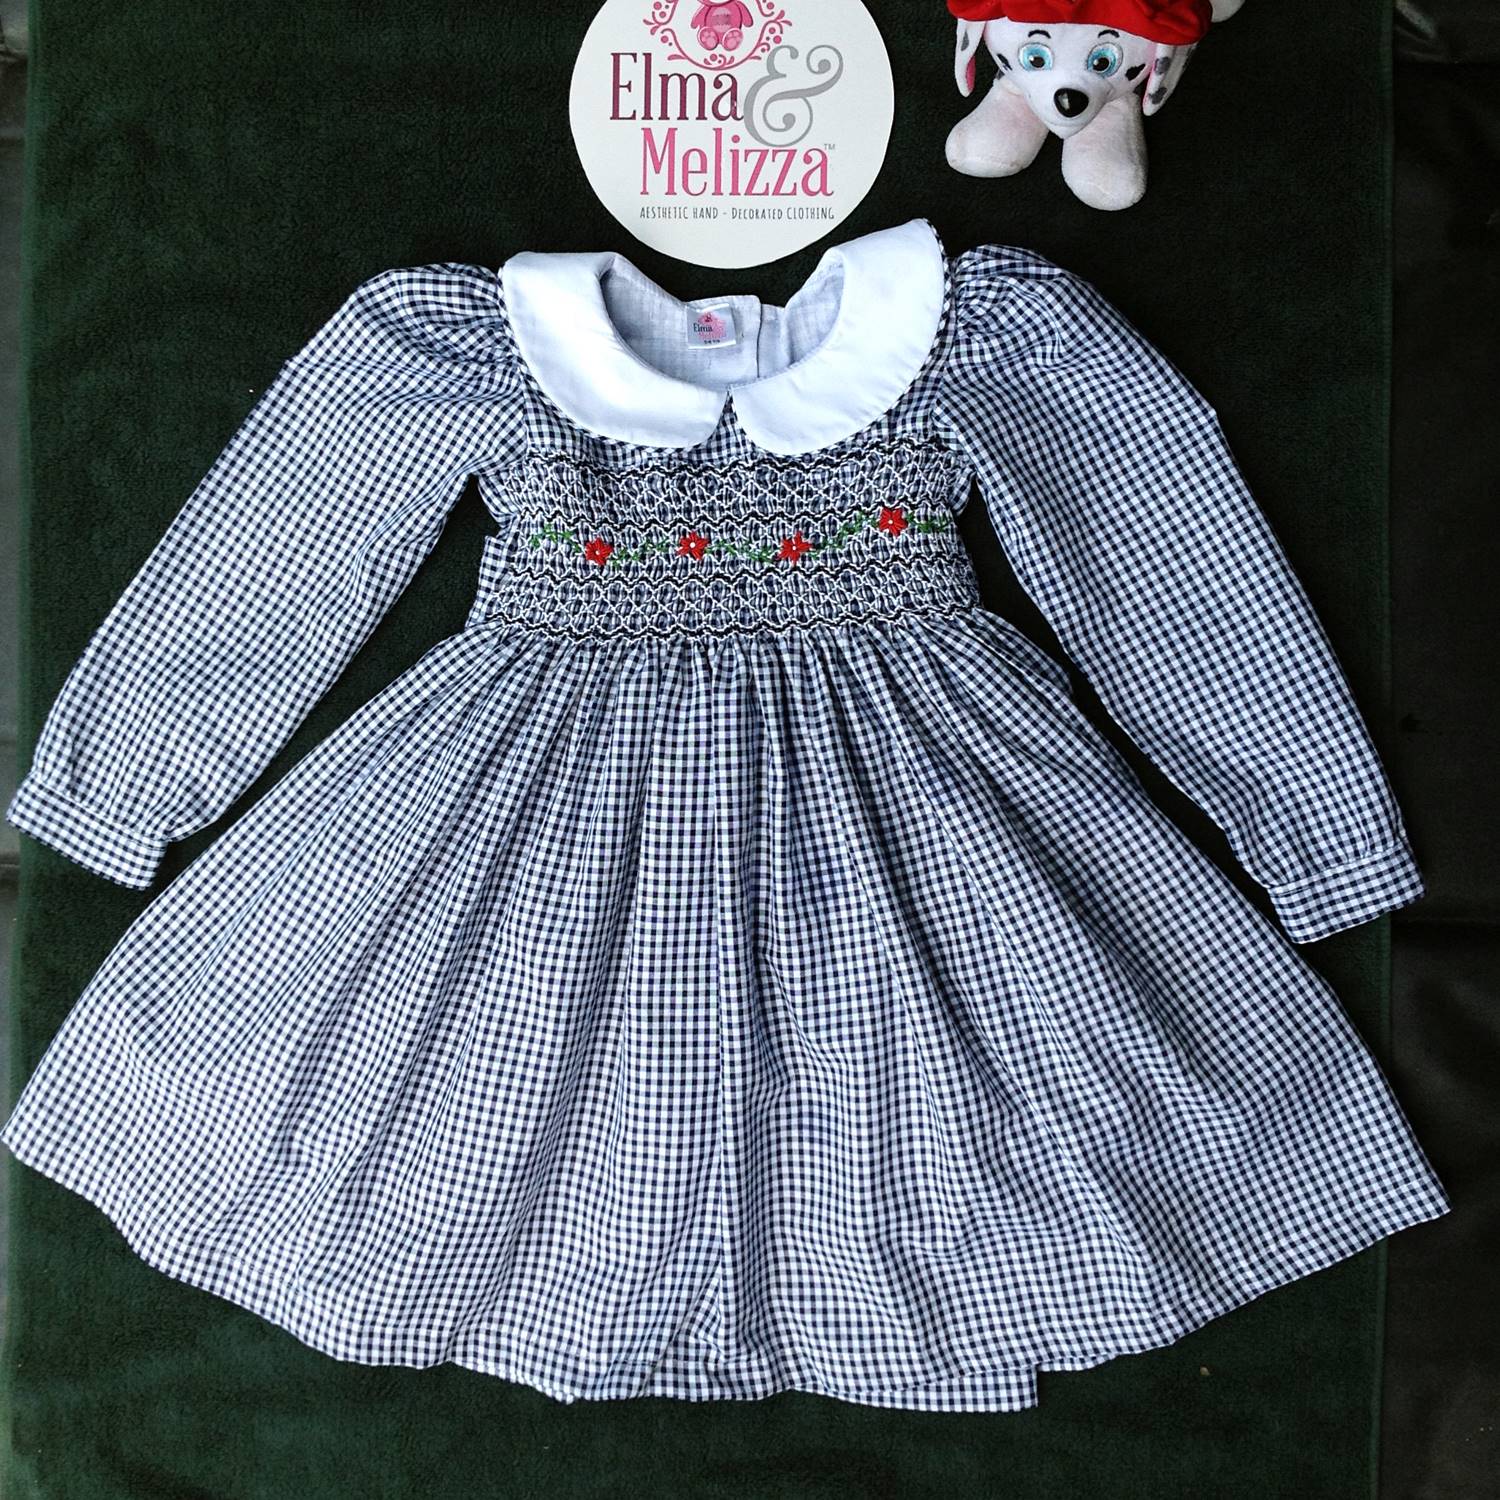 Trendy Baby Frock Hand Embroidery Designs At Affordable Prices - Alibaba.com-hangkhonggiare.com.vn